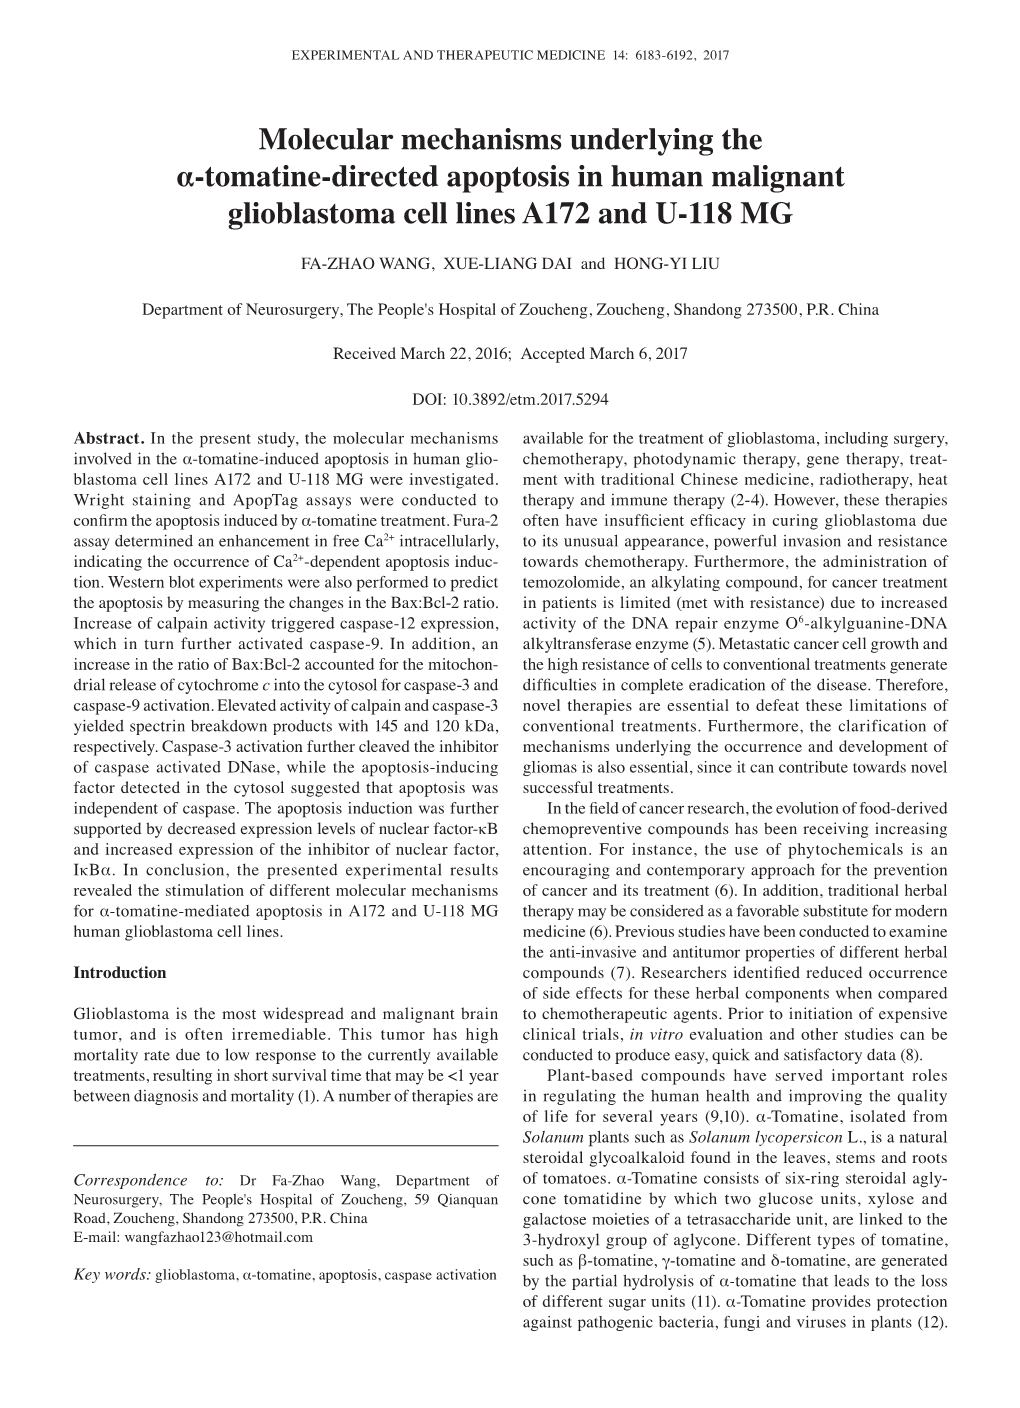 Molecular Mechanisms Underlying the Α‑Tomatine‑Directed Apoptosis in Human Malignant Glioblastoma Cell Lines A172 and U‑118 MG